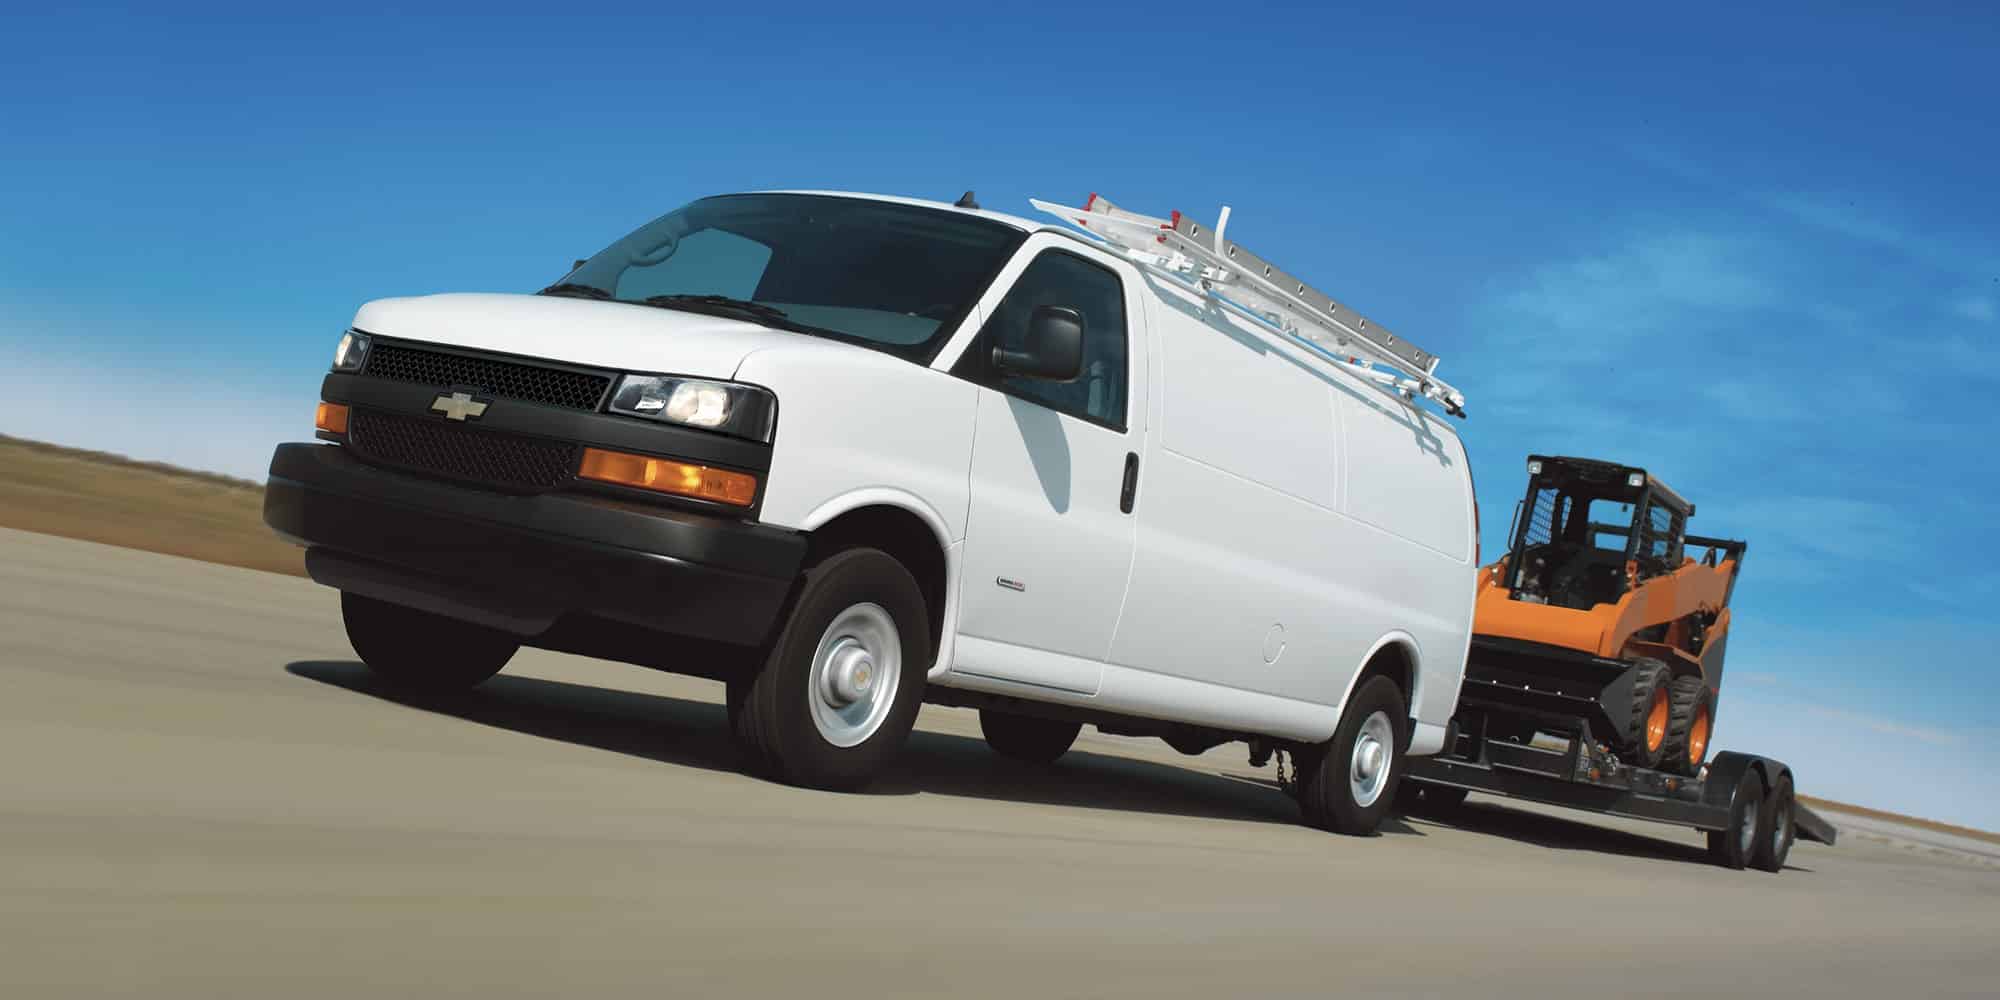 Chevy Express pic 1